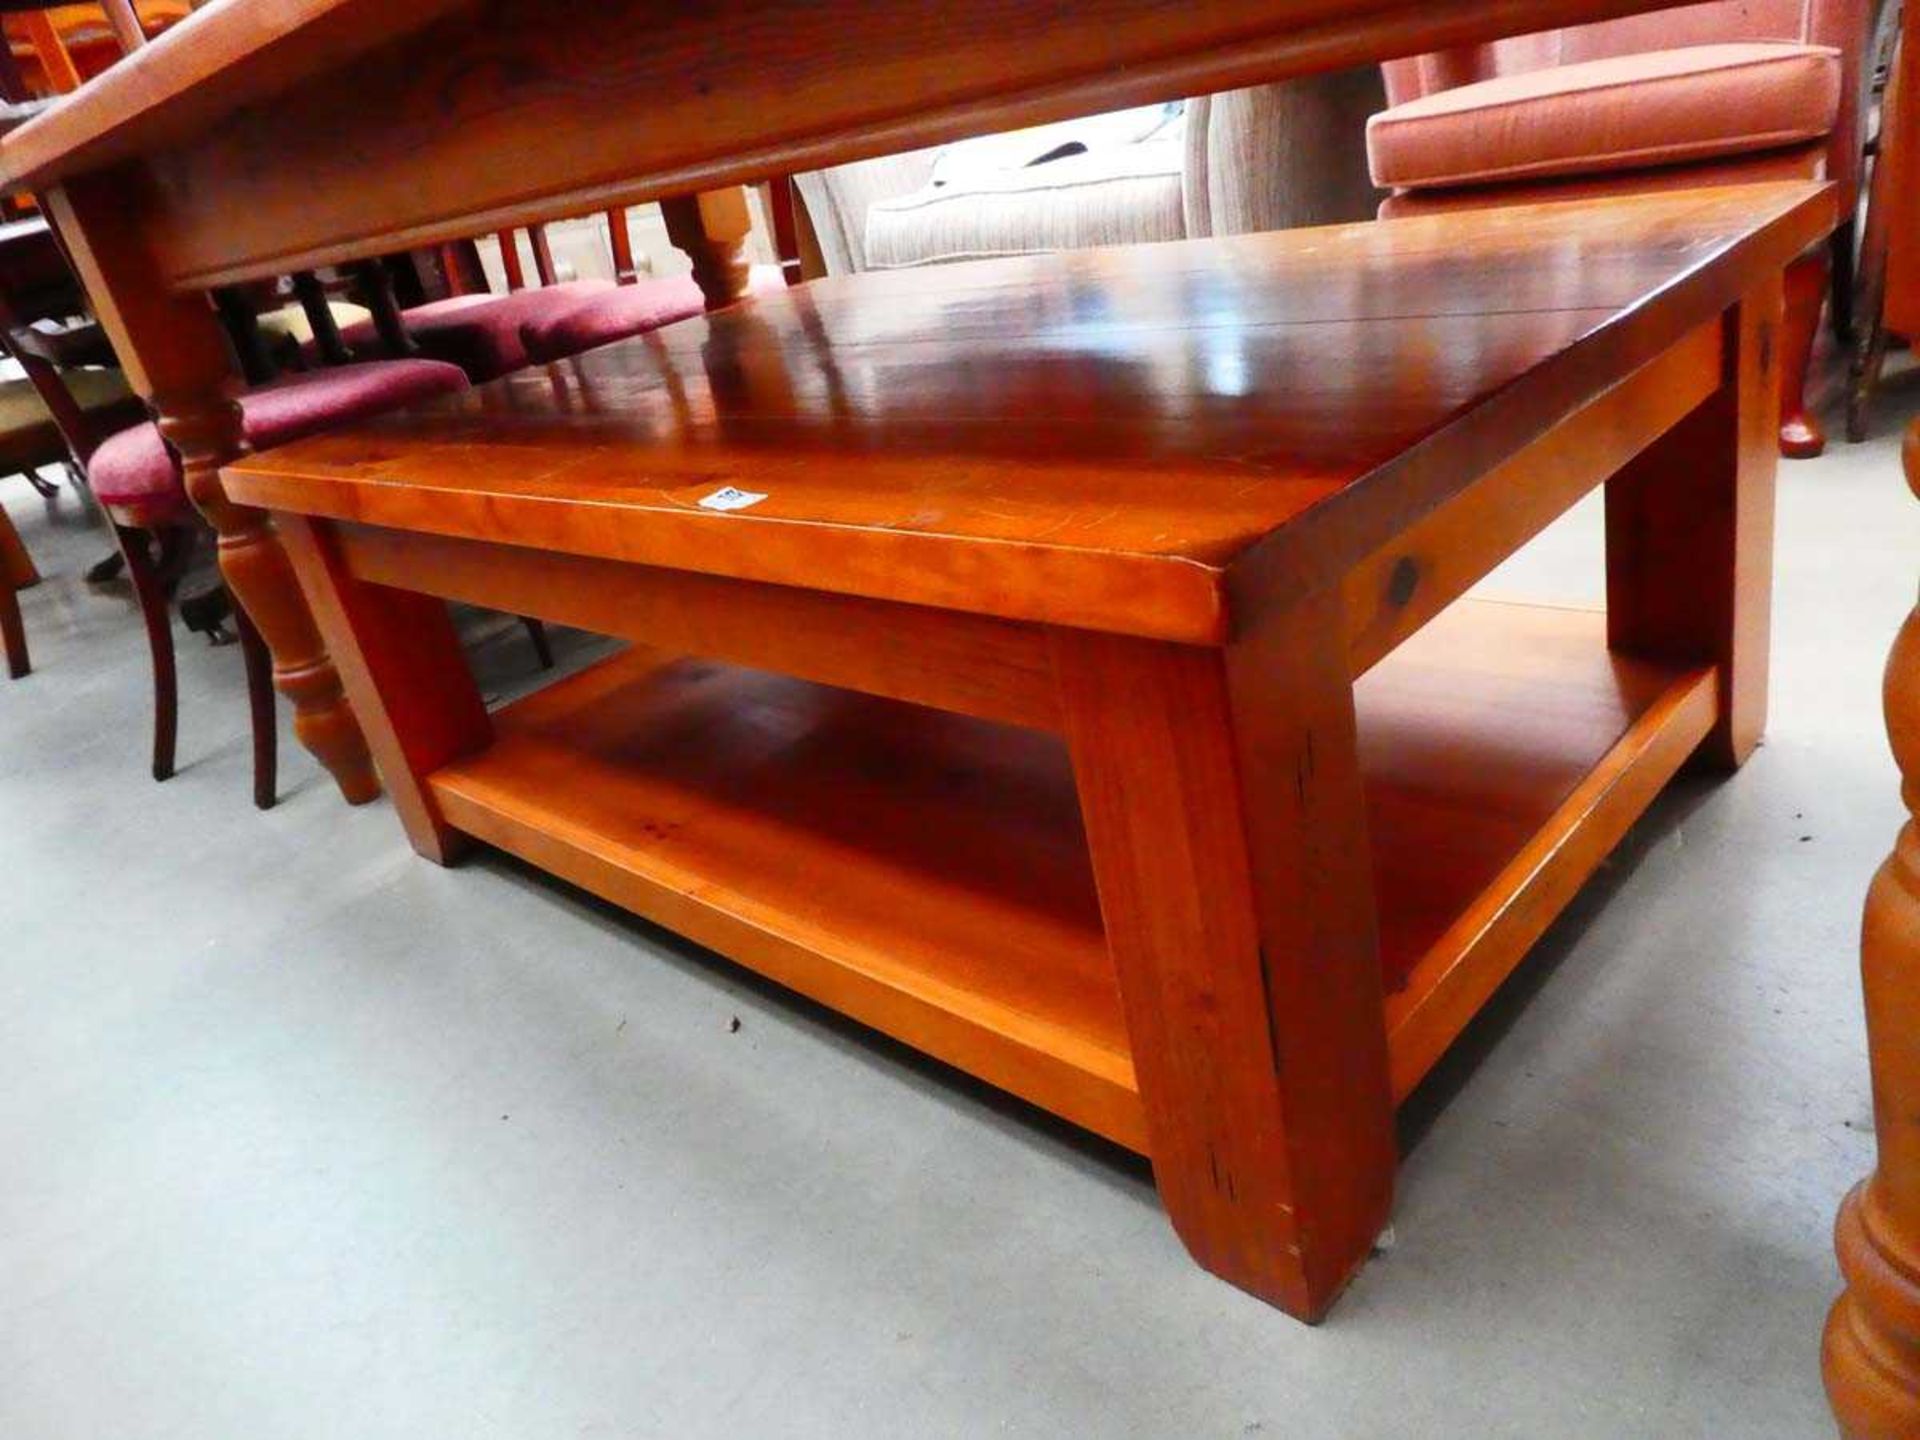 Large pine coffee table with single shelf under